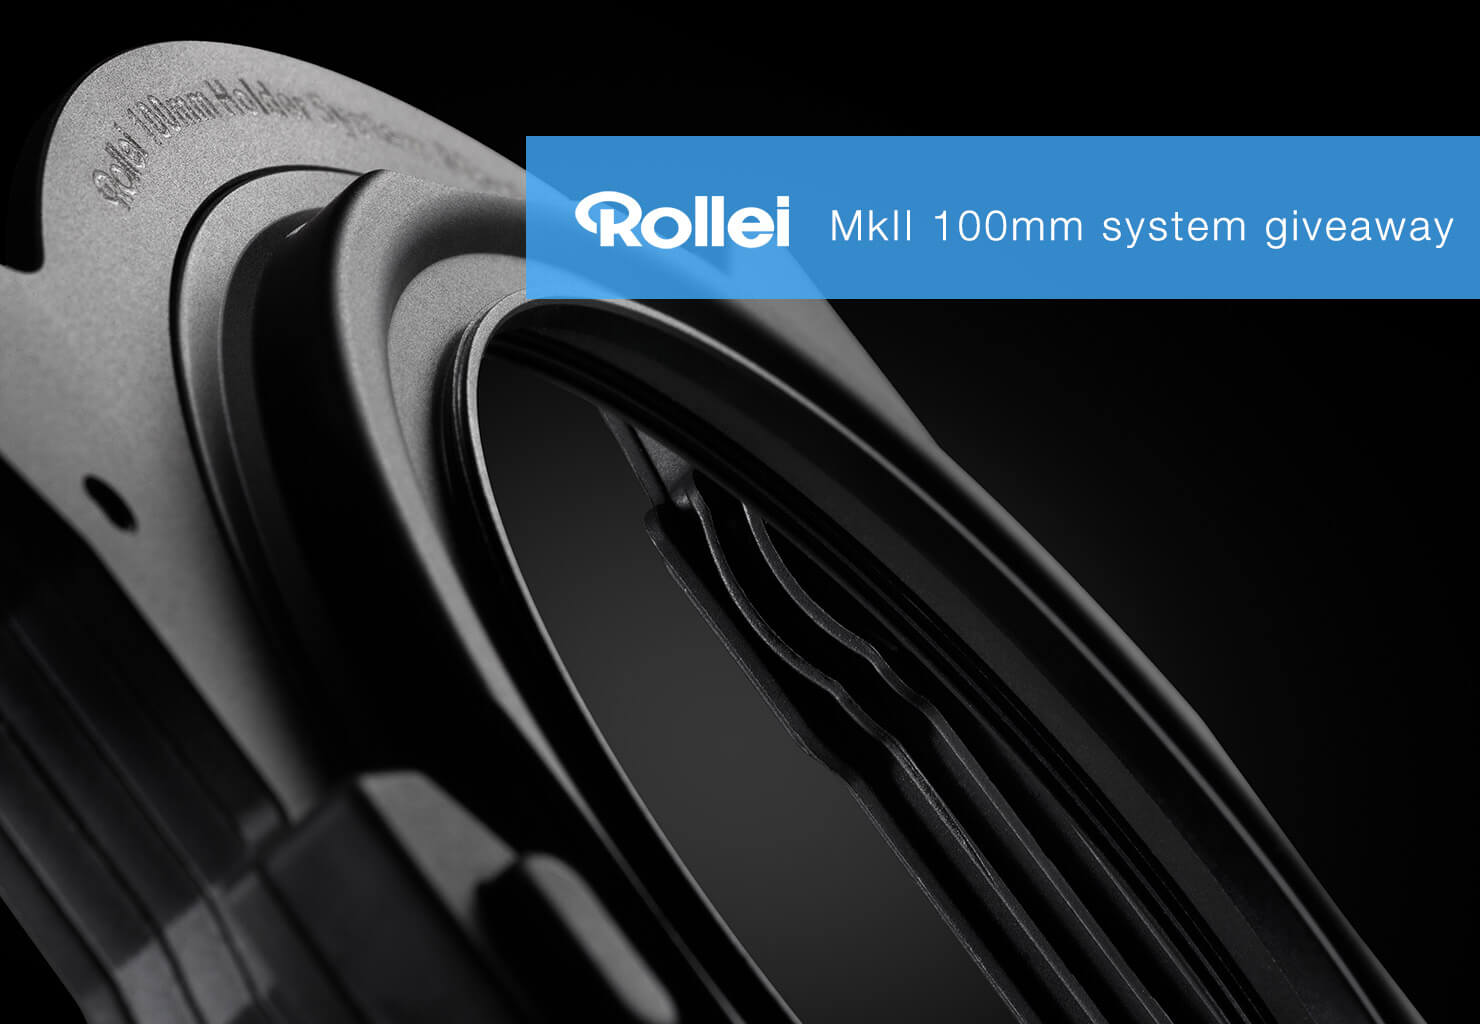 rollei mark ii 2 100mm filter system giveaway banner paul reiffer photographer october 2017 launch competition without logo